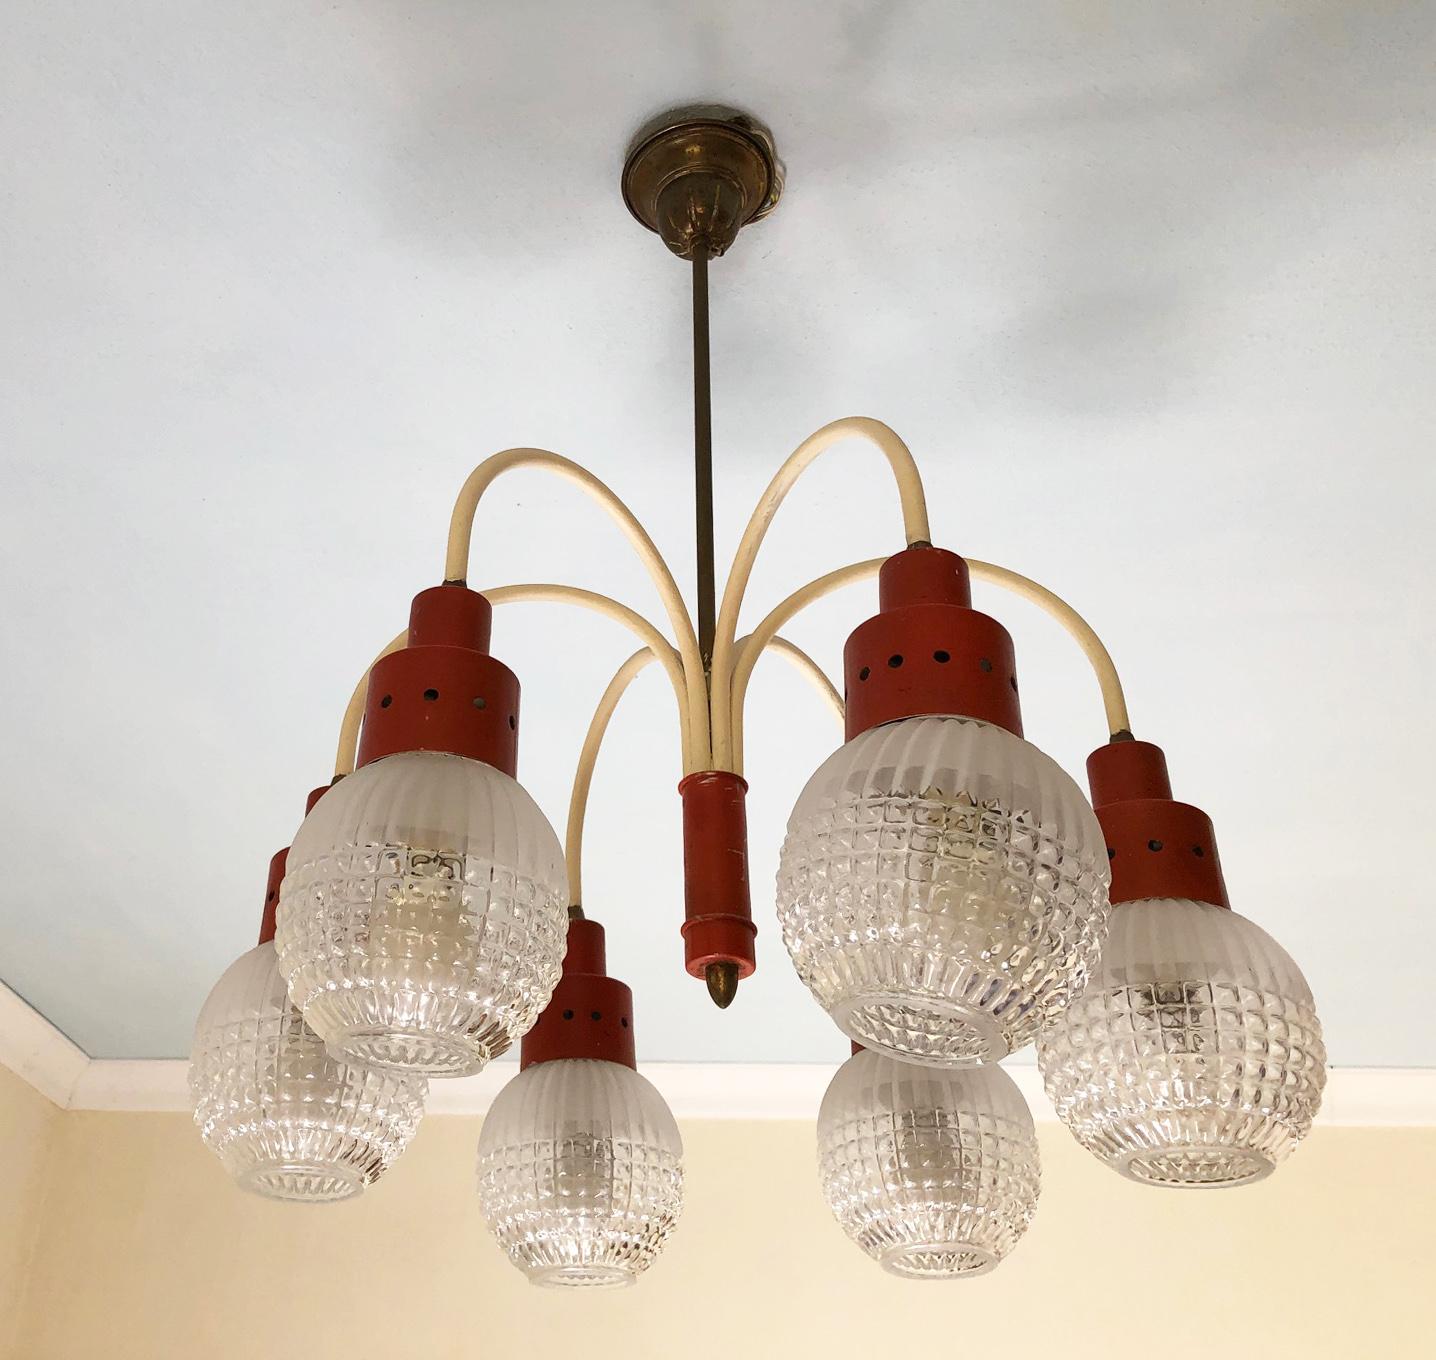 Late 20th Century Original Italian Chandelier from 1970s with Six Lights, Orange and Cream Color For Sale